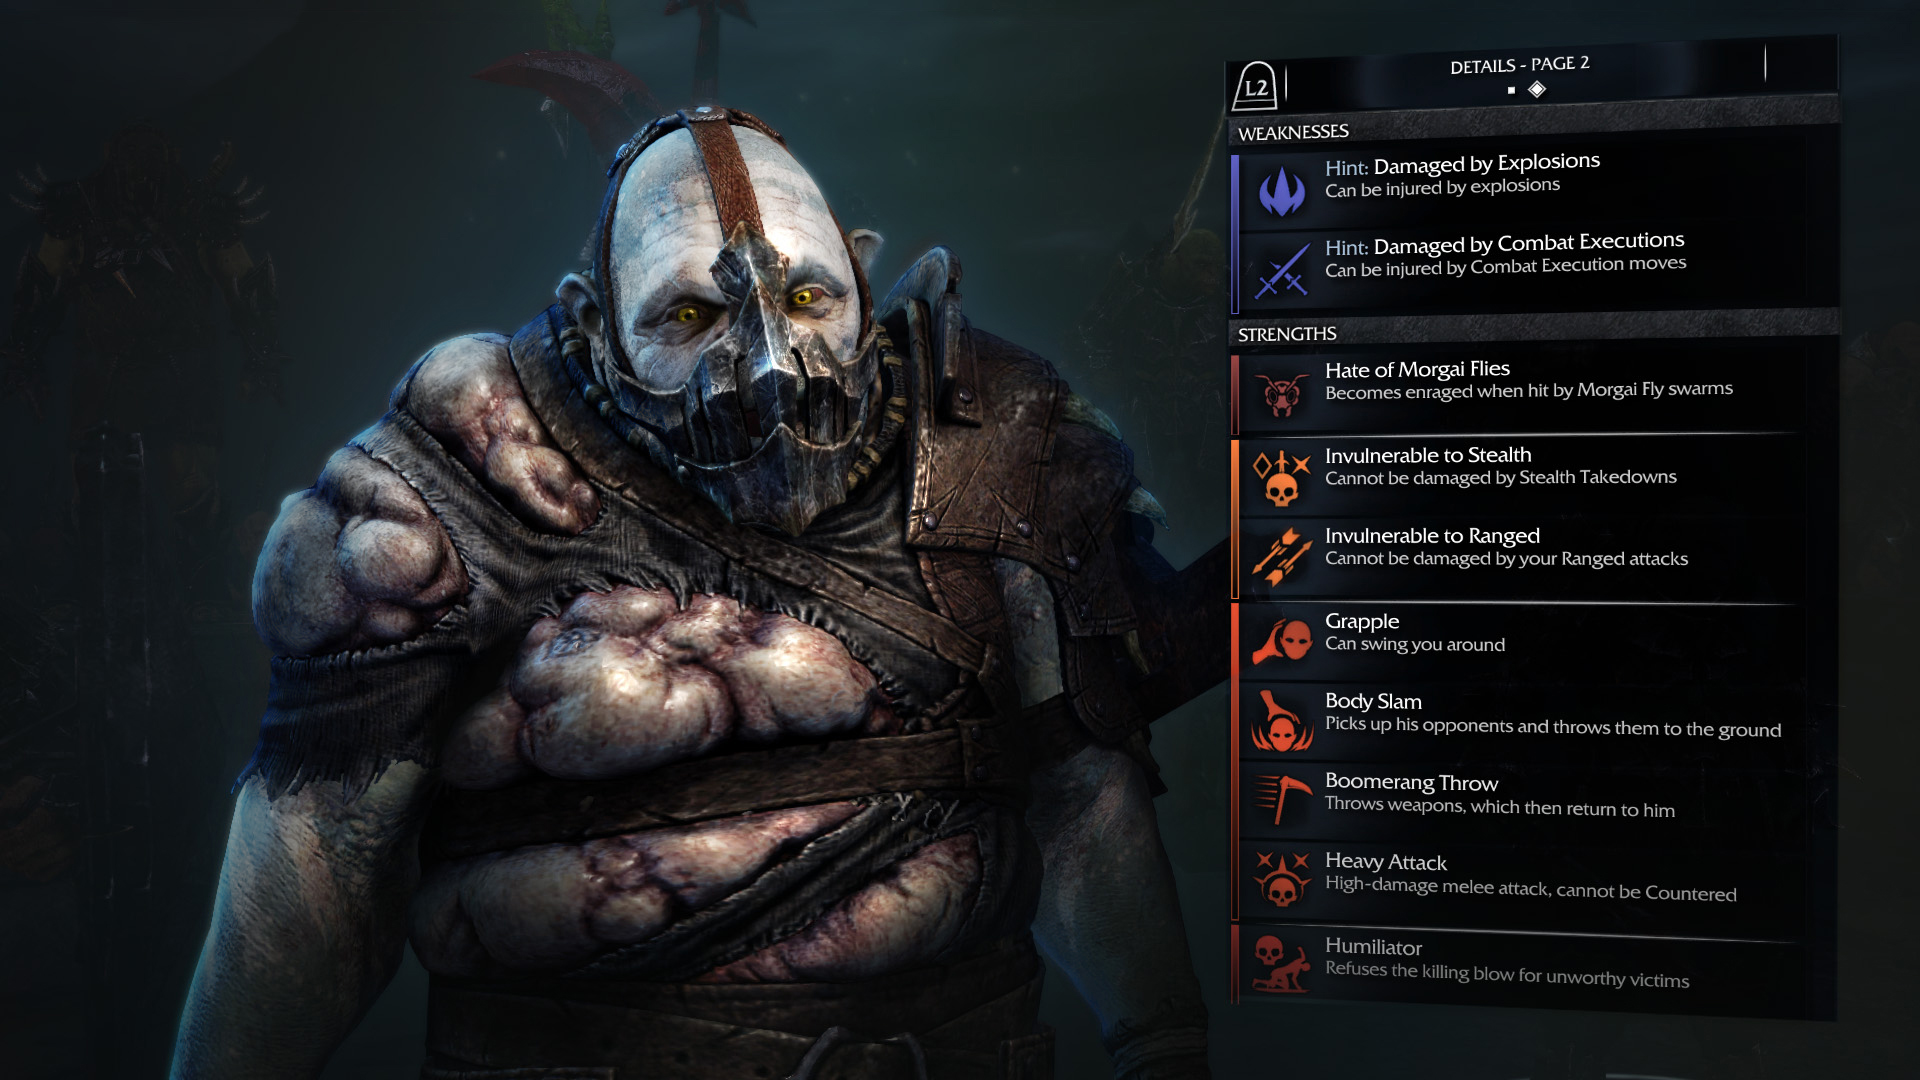 MIddle Earth: Shadow of Mordor - Gameplay Demo Walkthrough 1080p (Best  Quality) (PS4/XB1/PC/PS3/360) 